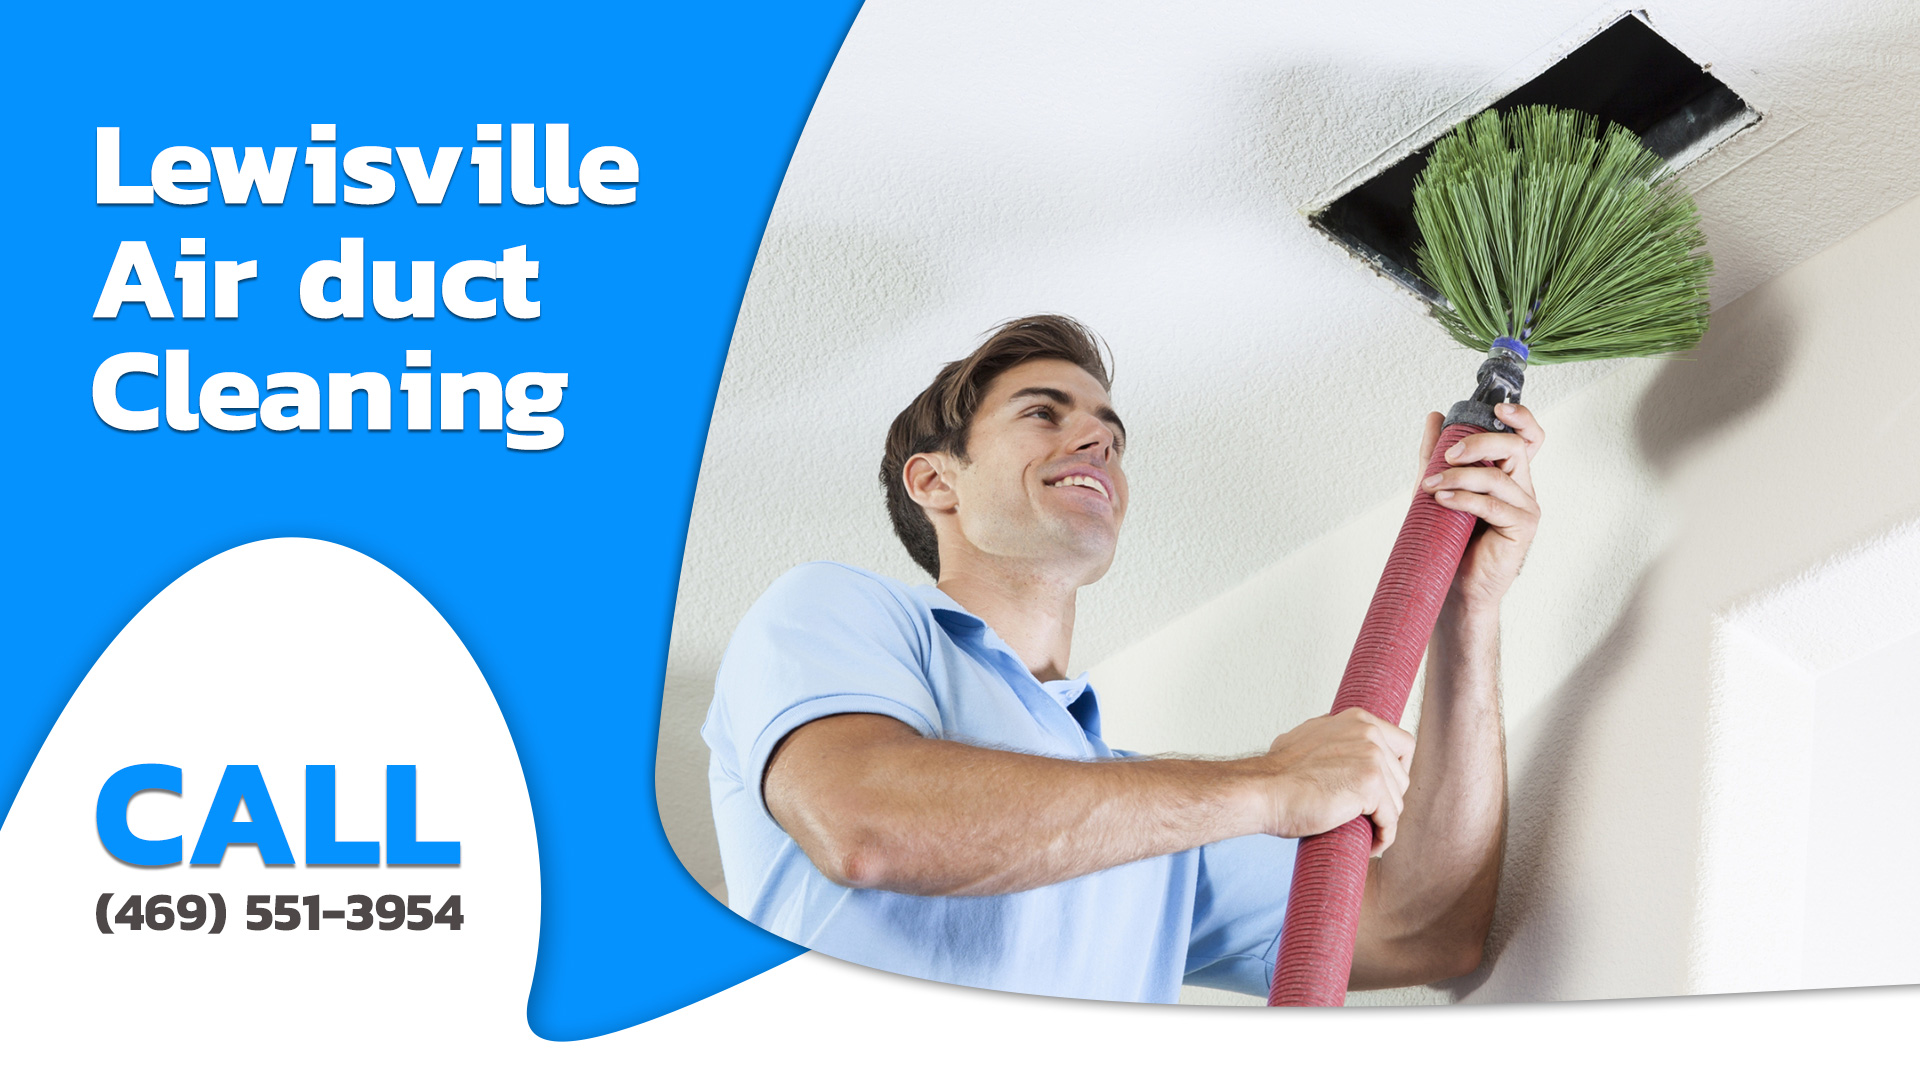 Lewisville TX Air Duct Cleaning : Mold (Removal) Near Me